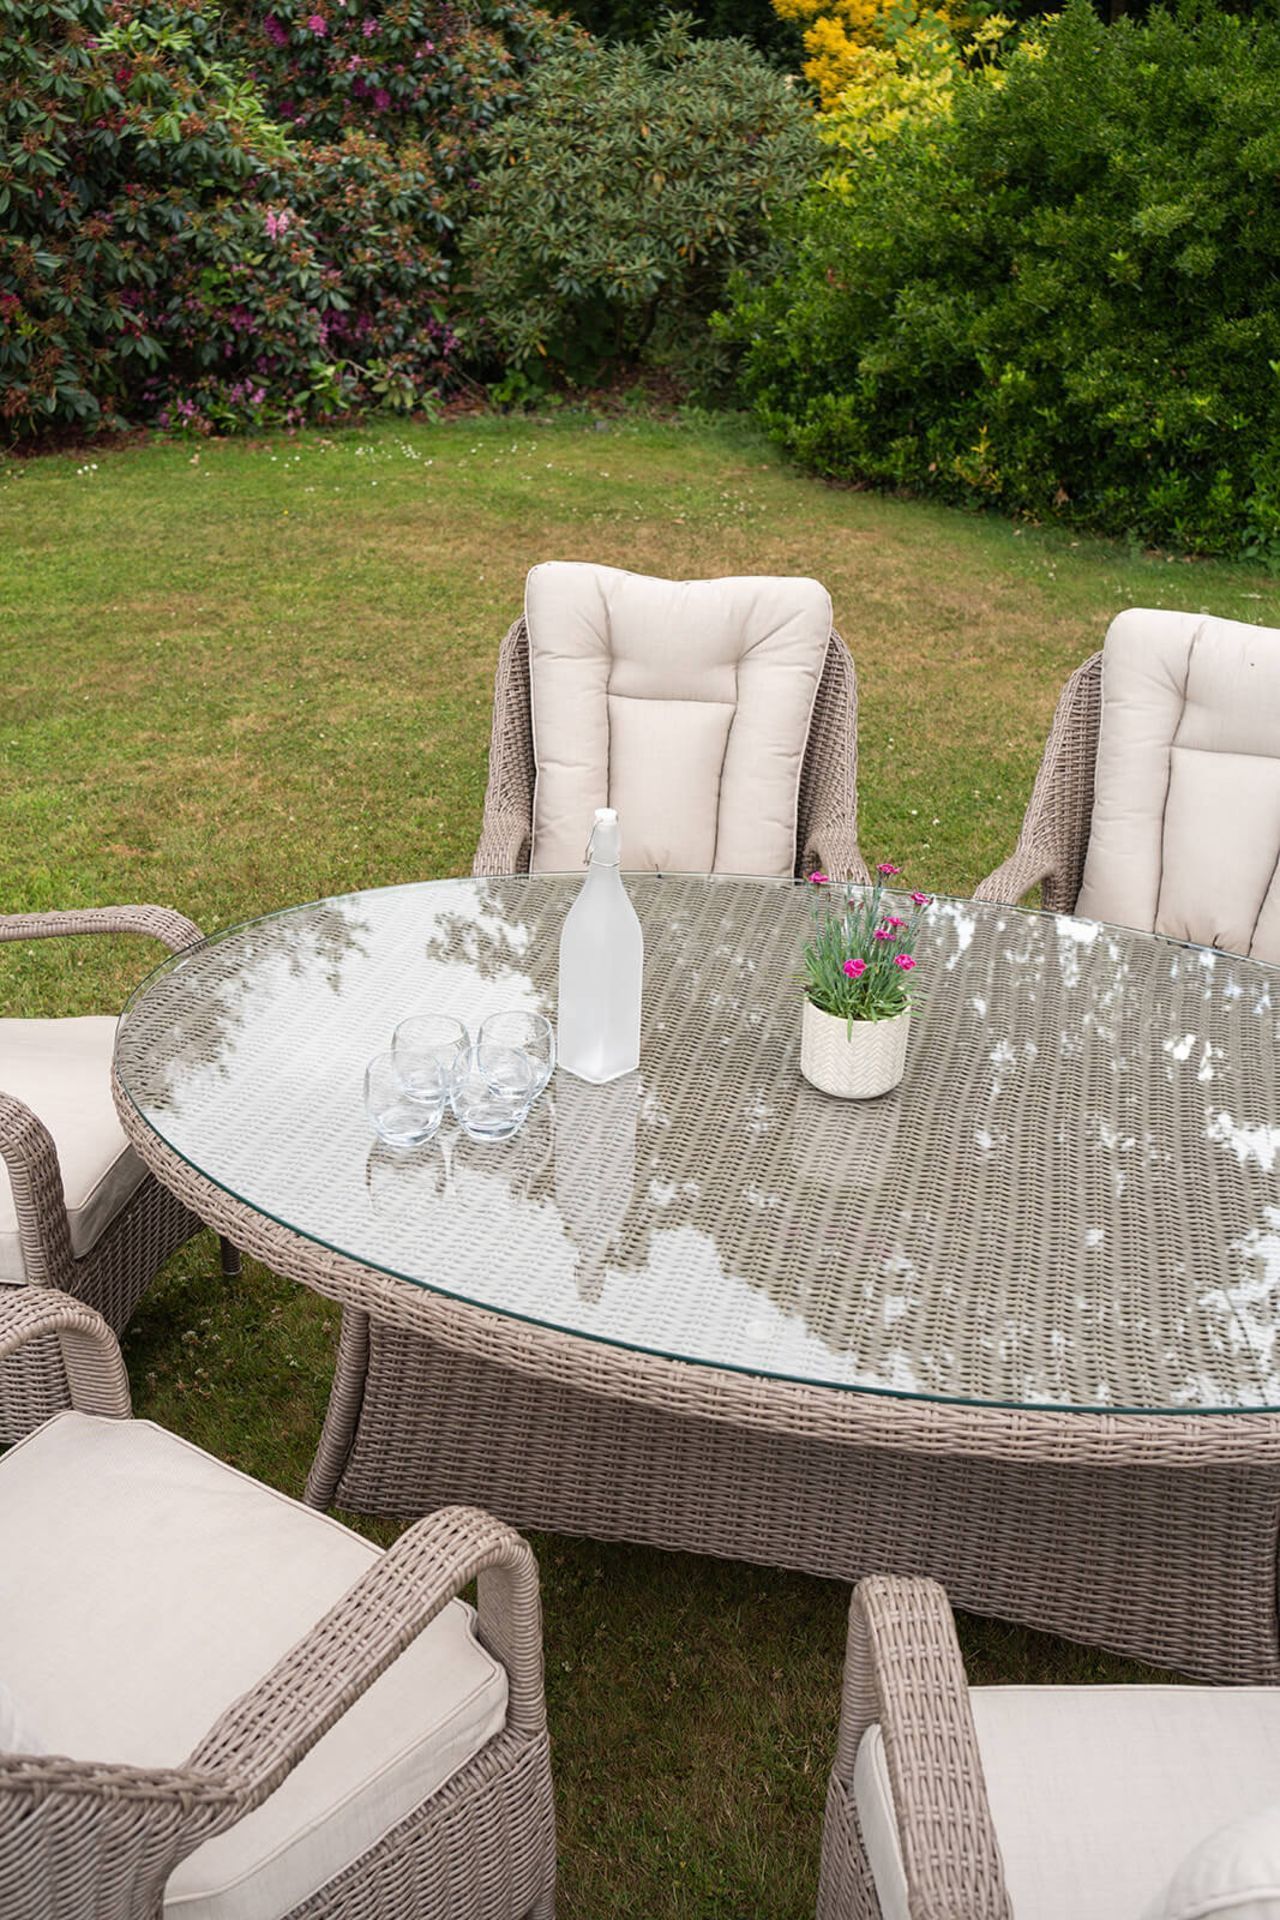 Brand New Moda Furniture 6 Seater Oval Outdoor Dining Set in Natural With Cream Cushions. RRP £ - Image 7 of 8